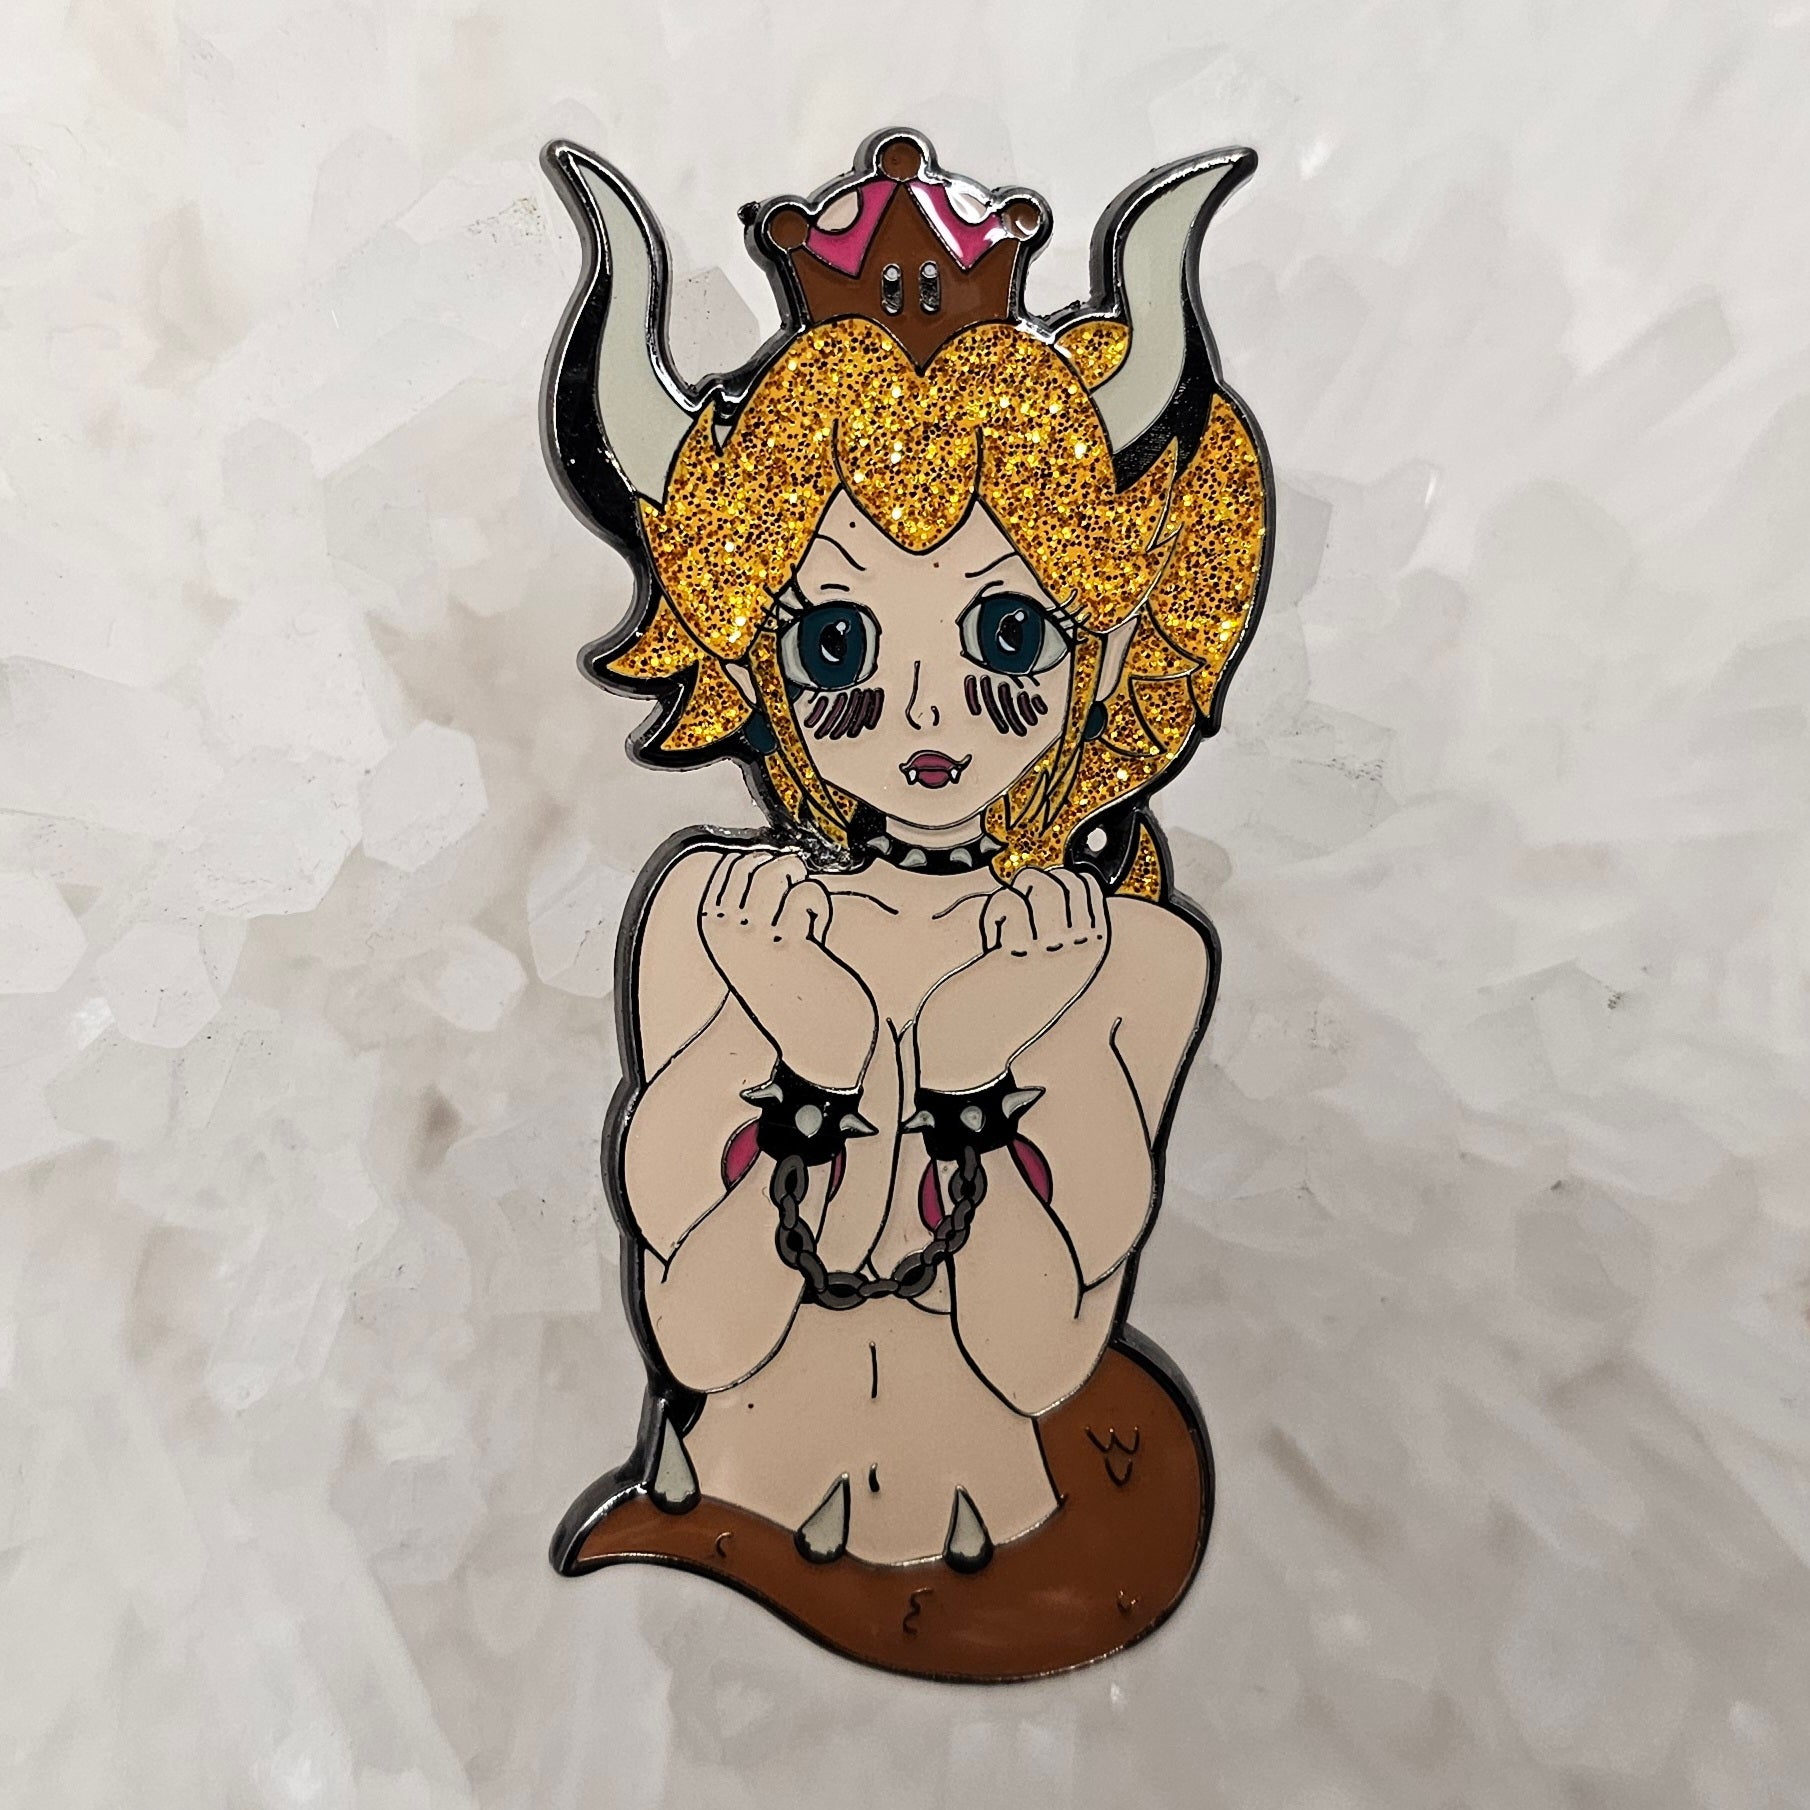 Bowsette Sexy Bowser Super Kinked Mario Bros Video Game Pin Up Glitter Enamel Pins Hat Pins Lapel Pin Brooch Badge Festival Pin